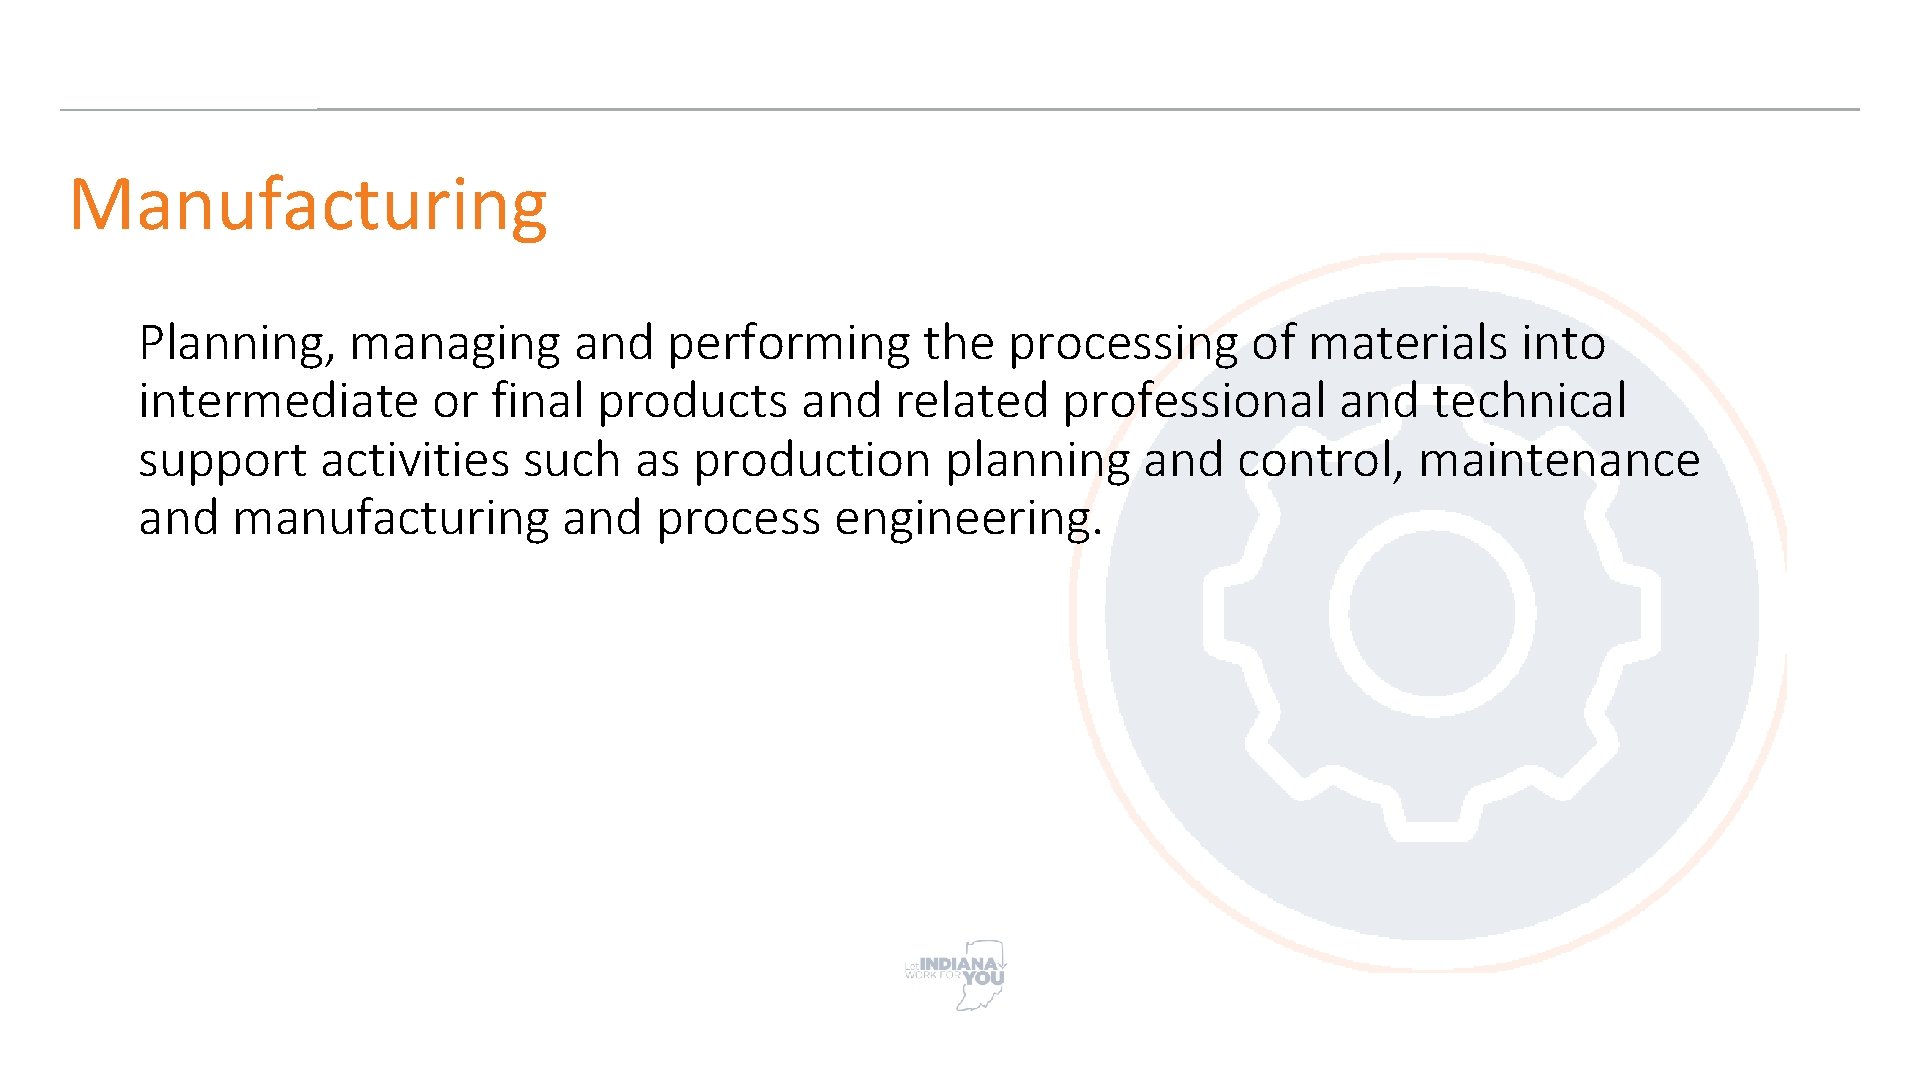 Manufacturing Planning, managing and performing the processing of materials into intermediate or final products